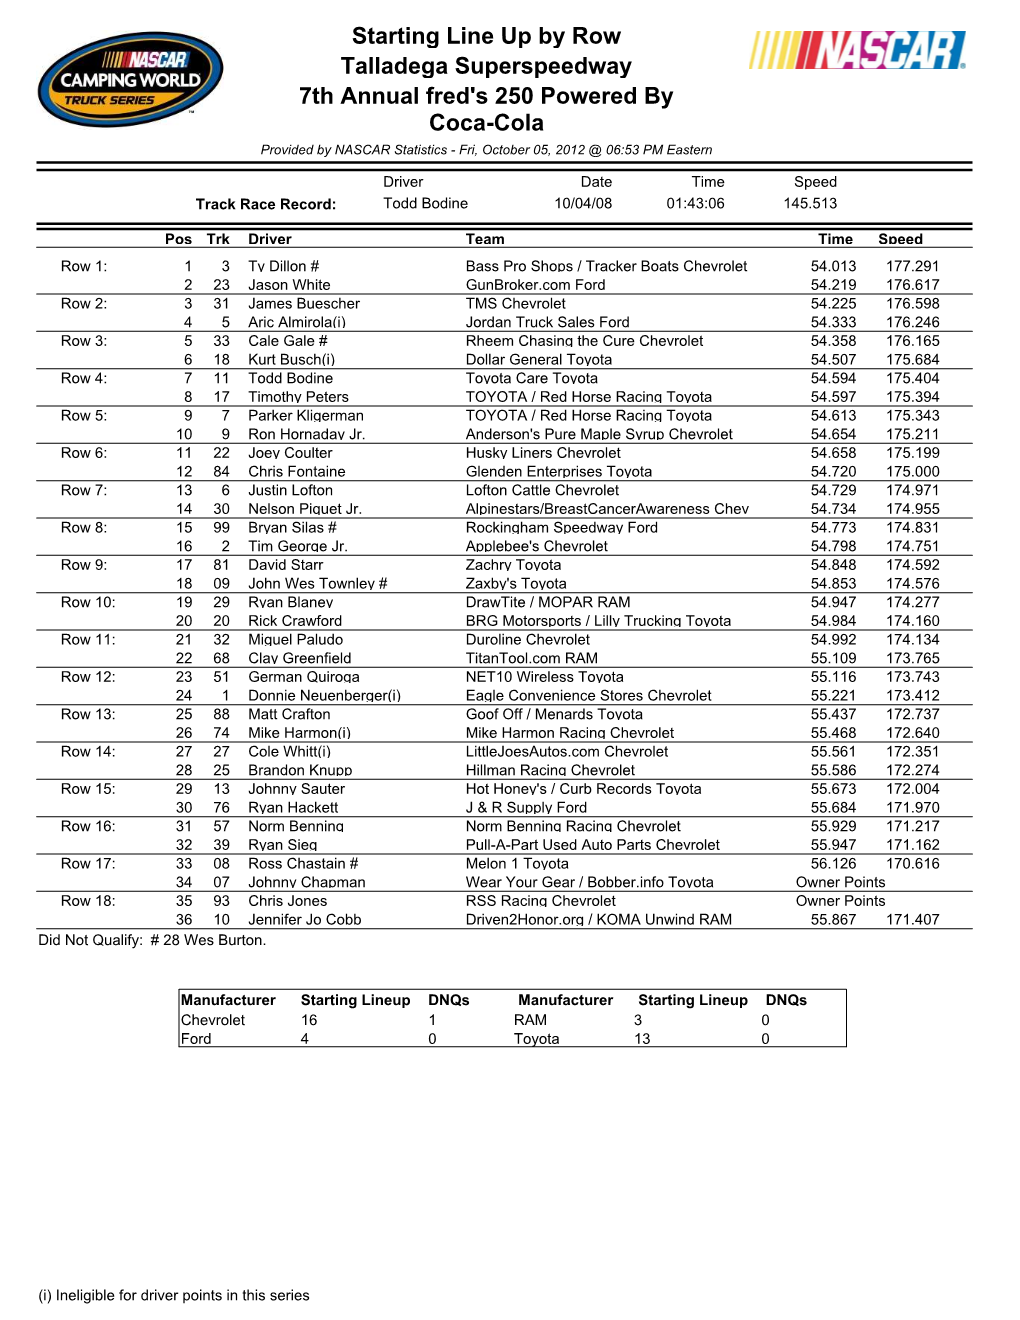 Starting Line up by Row Talladega Superspeedway 7Th Annual Fred's 250 Powered by Coca-Cola Provided by NASCAR Statistics - Fri, October 05, 2012 @ 06:53 PM Eastern